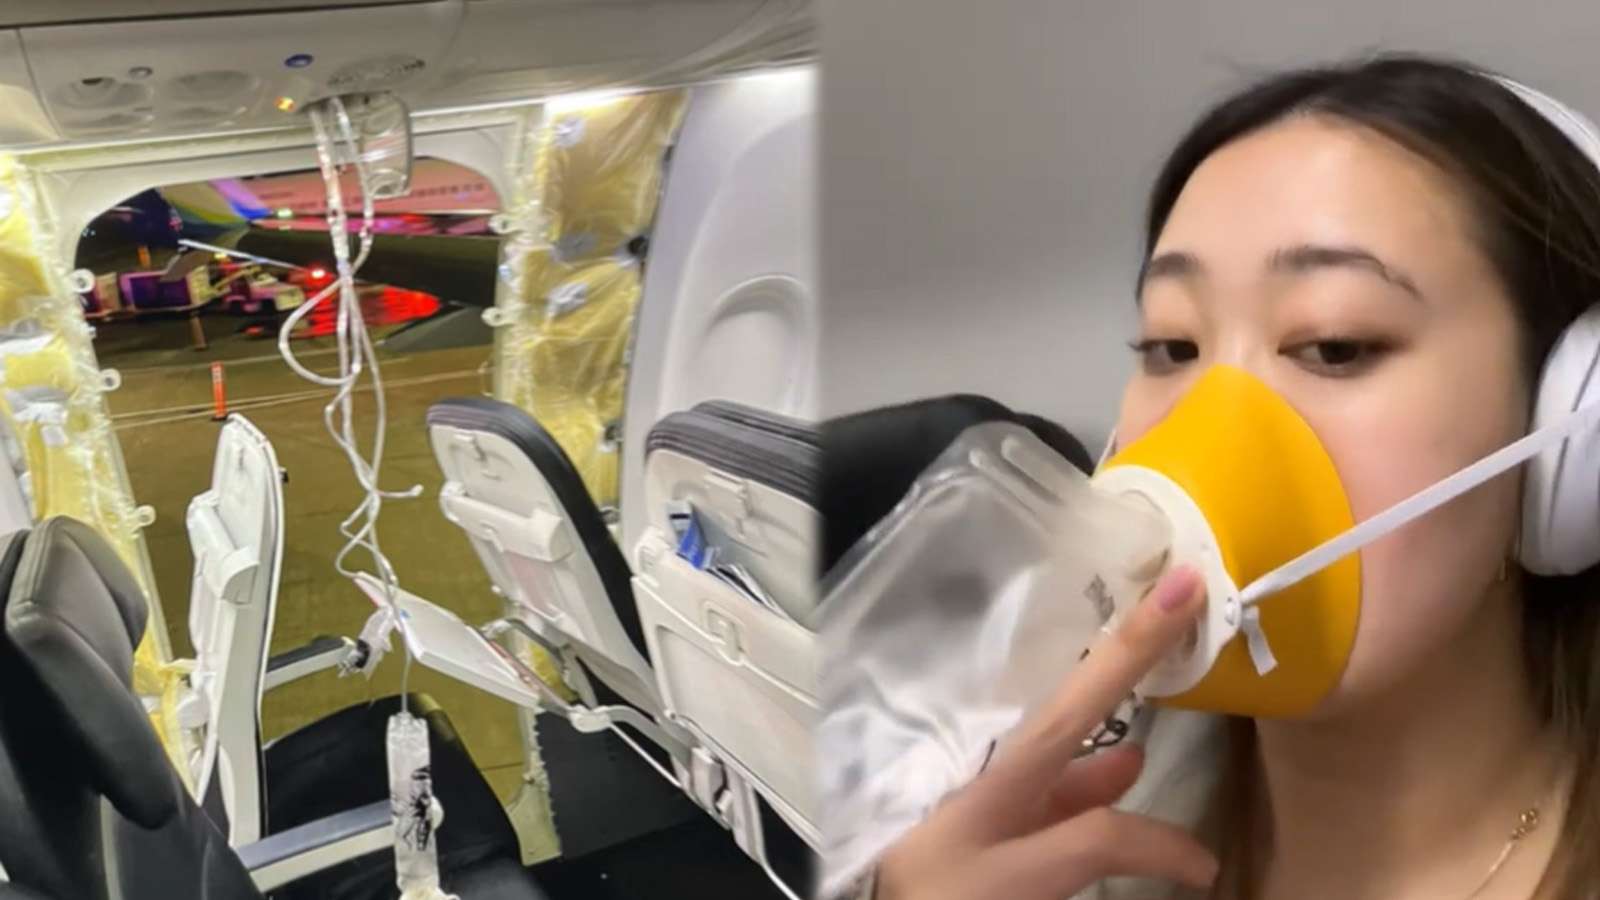 Passenger captures aftermath on Alaska Airlines as window blows out mid-flight